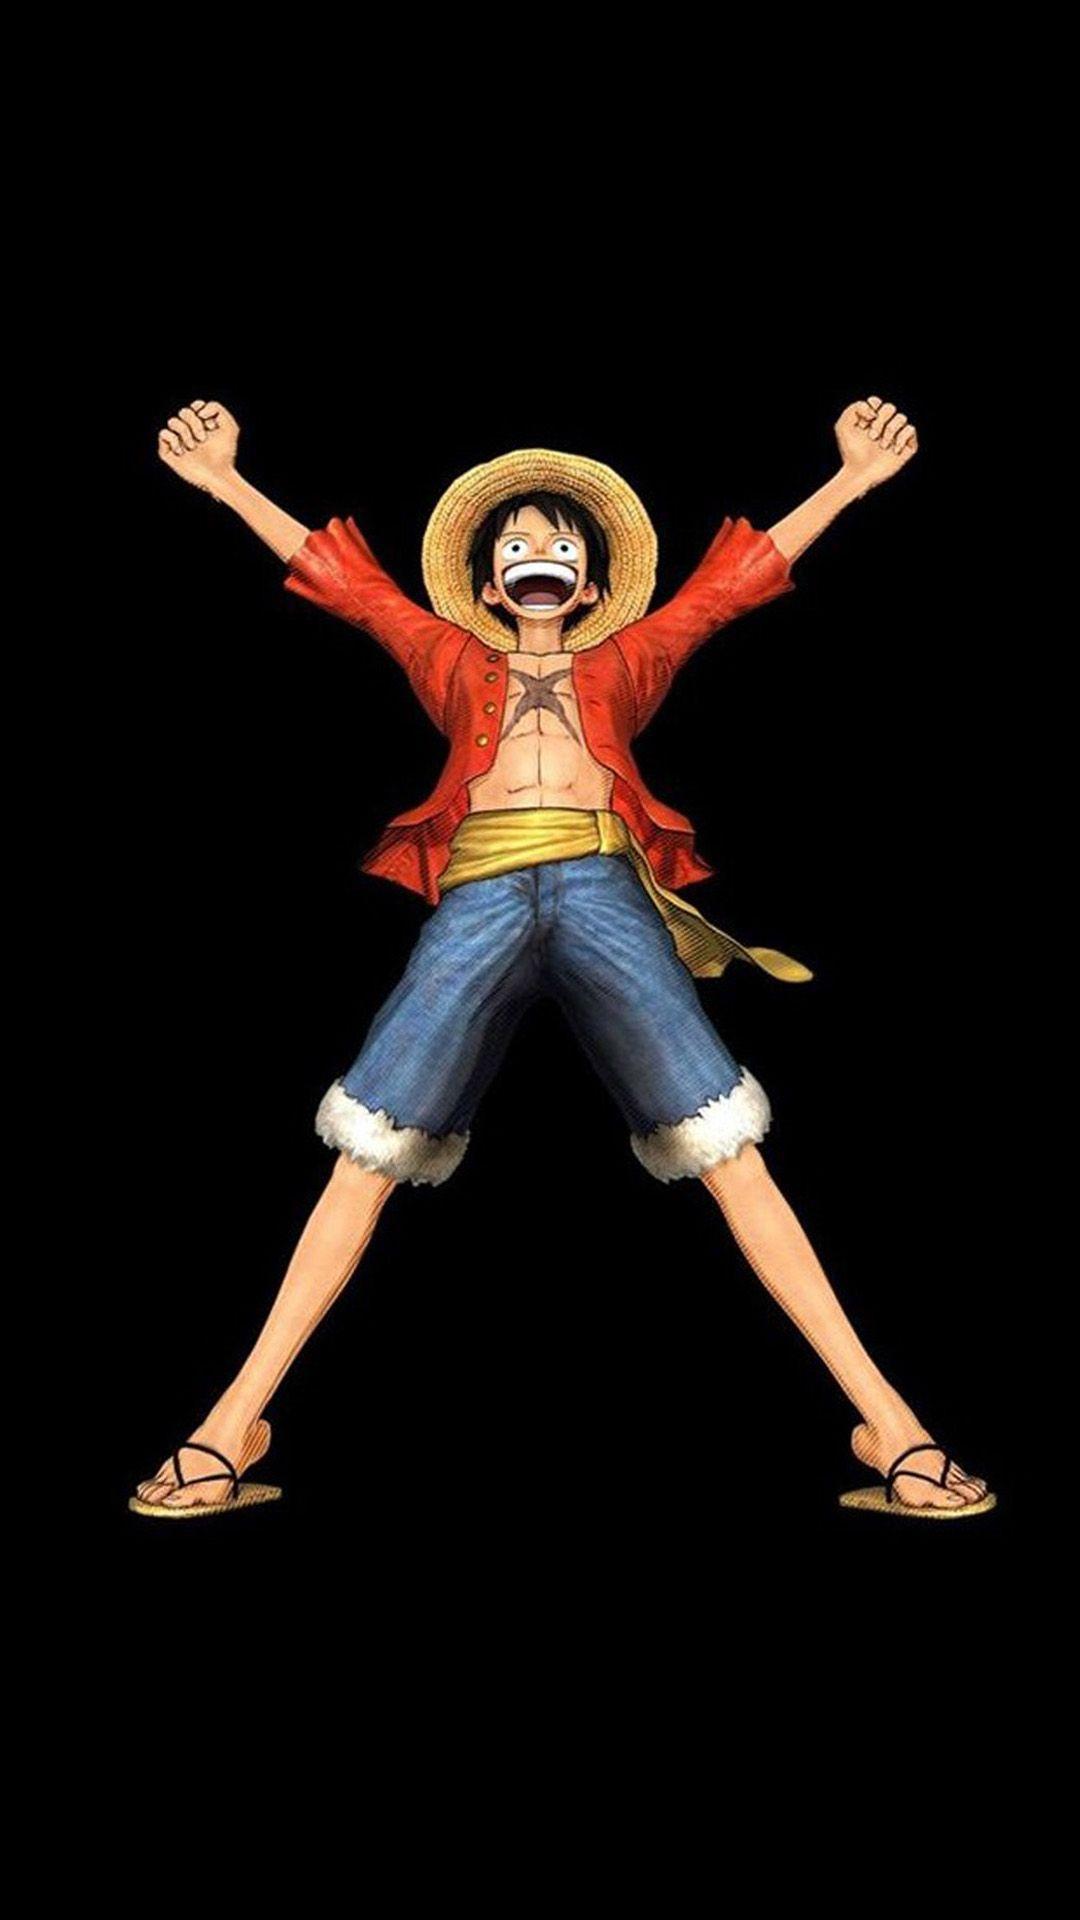 1080 x 1920 · jpeg - One Piece Mobile Wallpapers - Wallpaper Cave